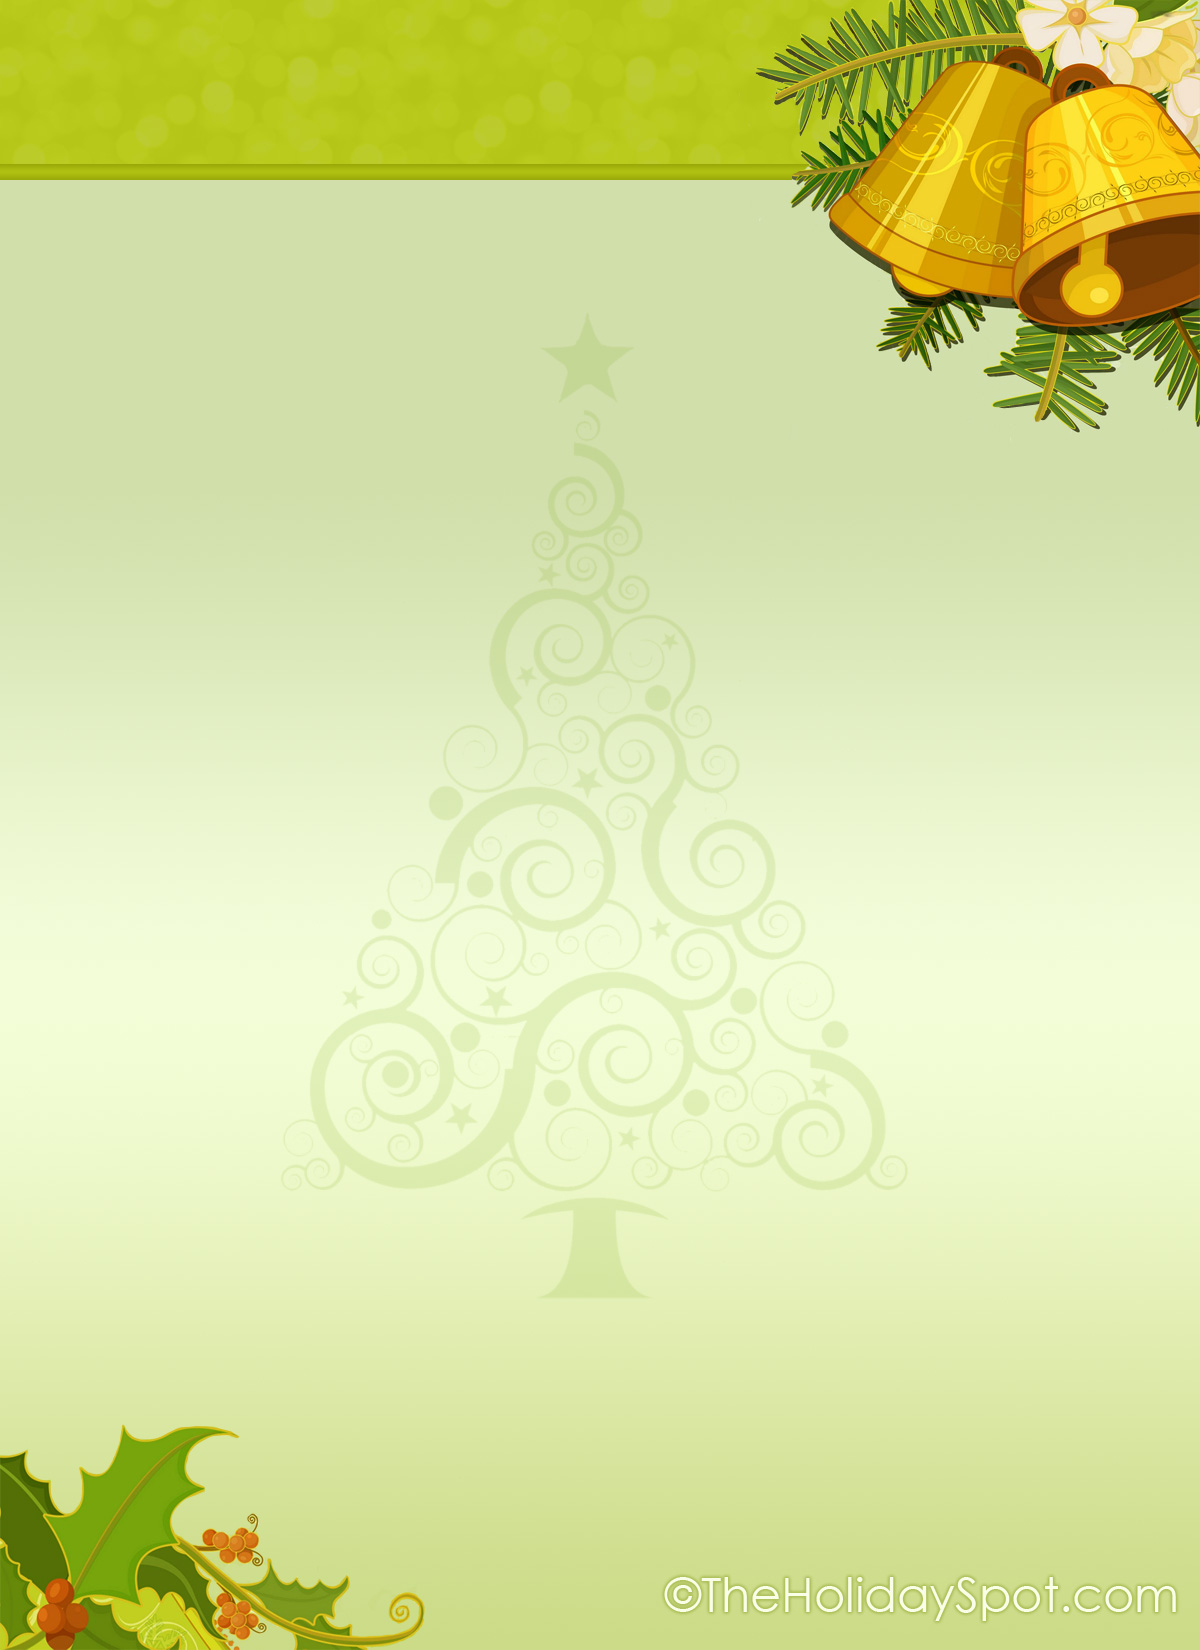 Christmas Letter Background Template - Christmas Letter Backgrounds for Free Acurnamedia